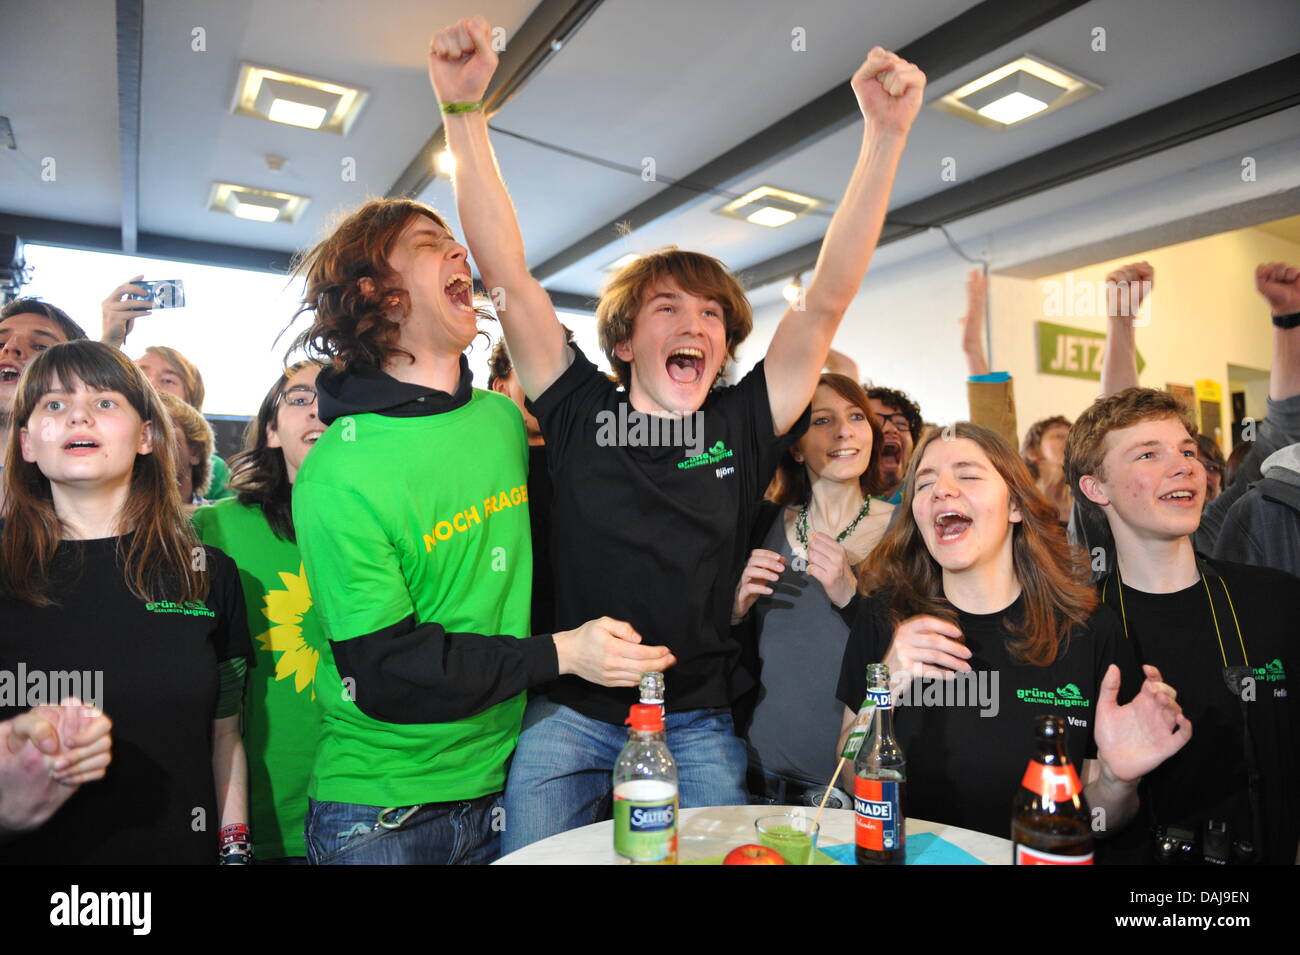 The picture shows supporters of the Green Party  celebrating after the first prognosis at the Landtag election in the state of Baden-Württemberg at the Landtag in Stuttgart, Germany on 27 March 2011. At the Landtag elections in Baden-Württember 7,8 million citizens are eligible to vote. 19 Parties with 684 candidates and 6 independent candidates have entered the elections. PHOTO: U Stock Photo